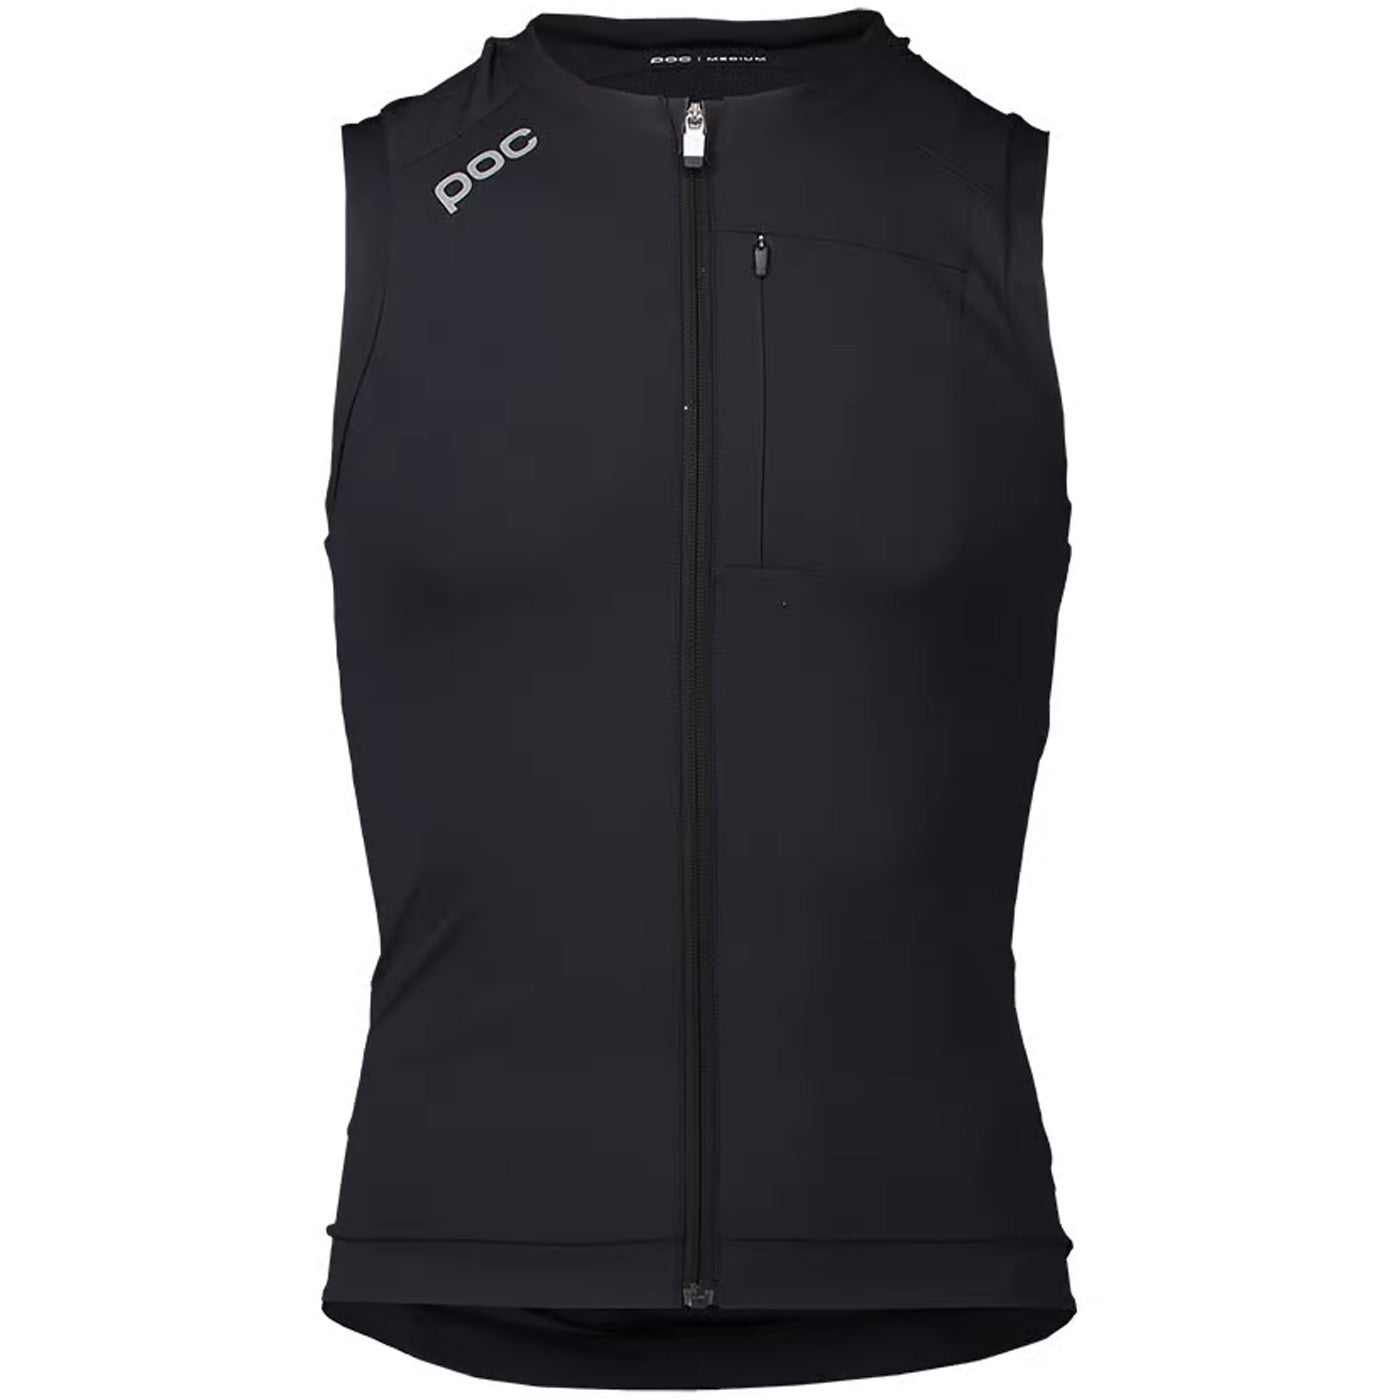 Poc Oseus VPD Vest protections - Black | All4cycling